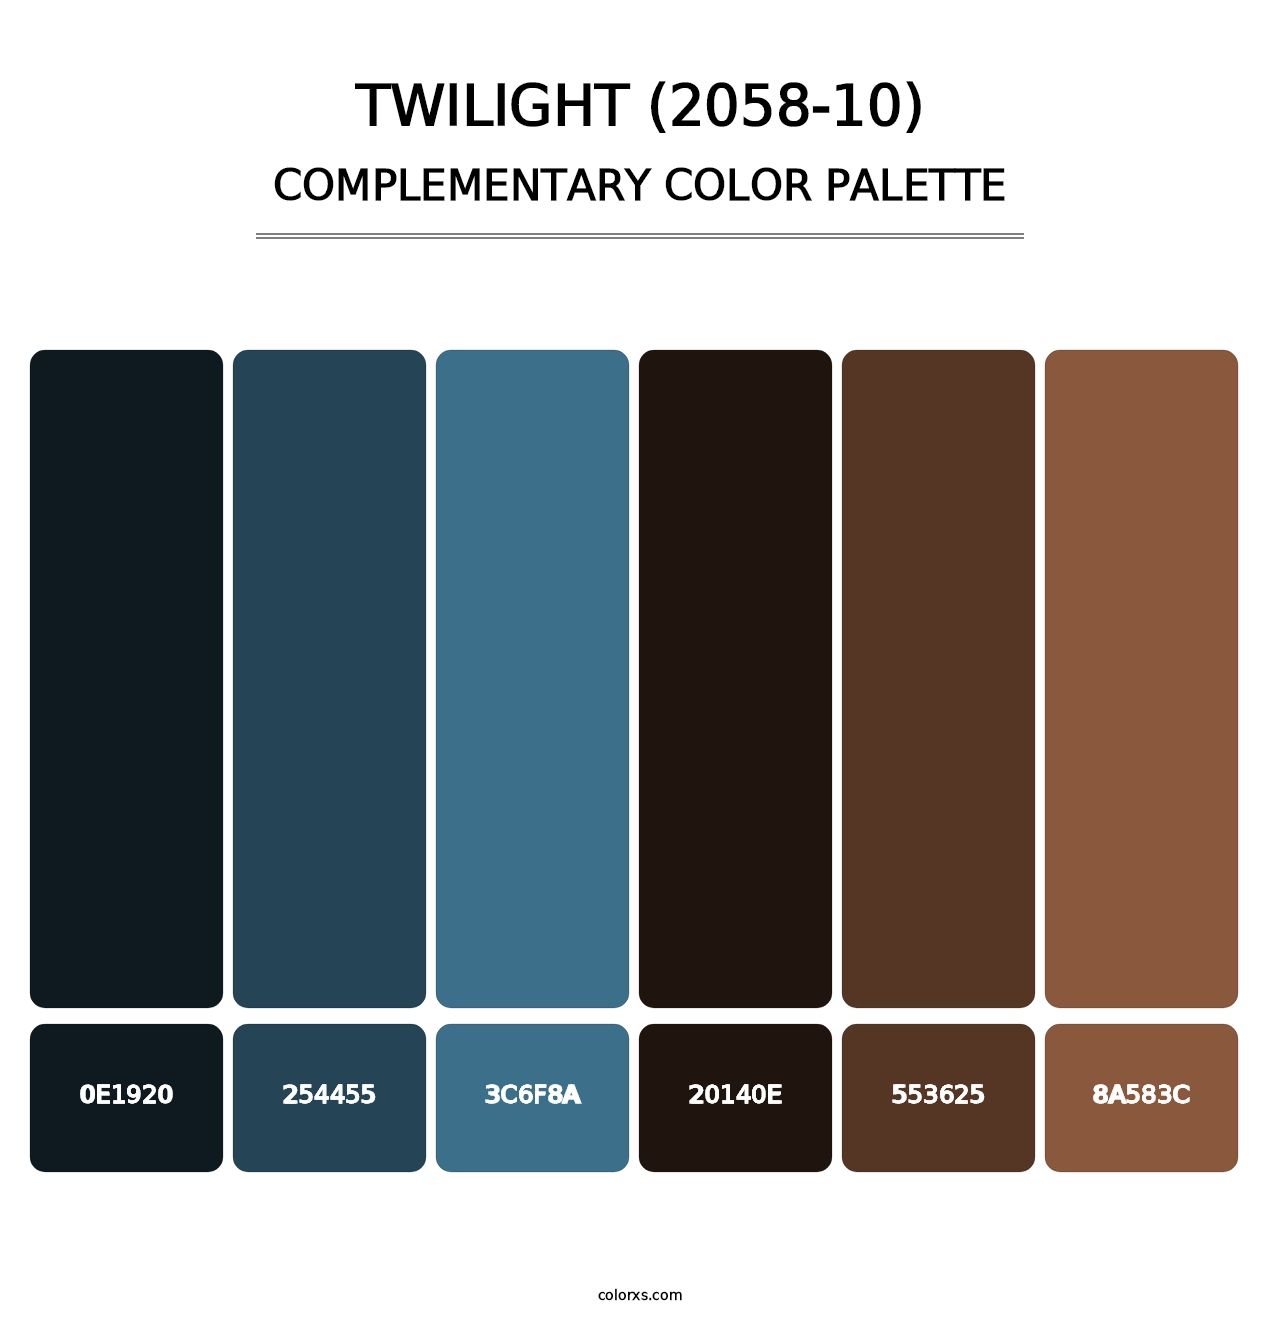 Twilight (2058-10) - Complementary Color Palette